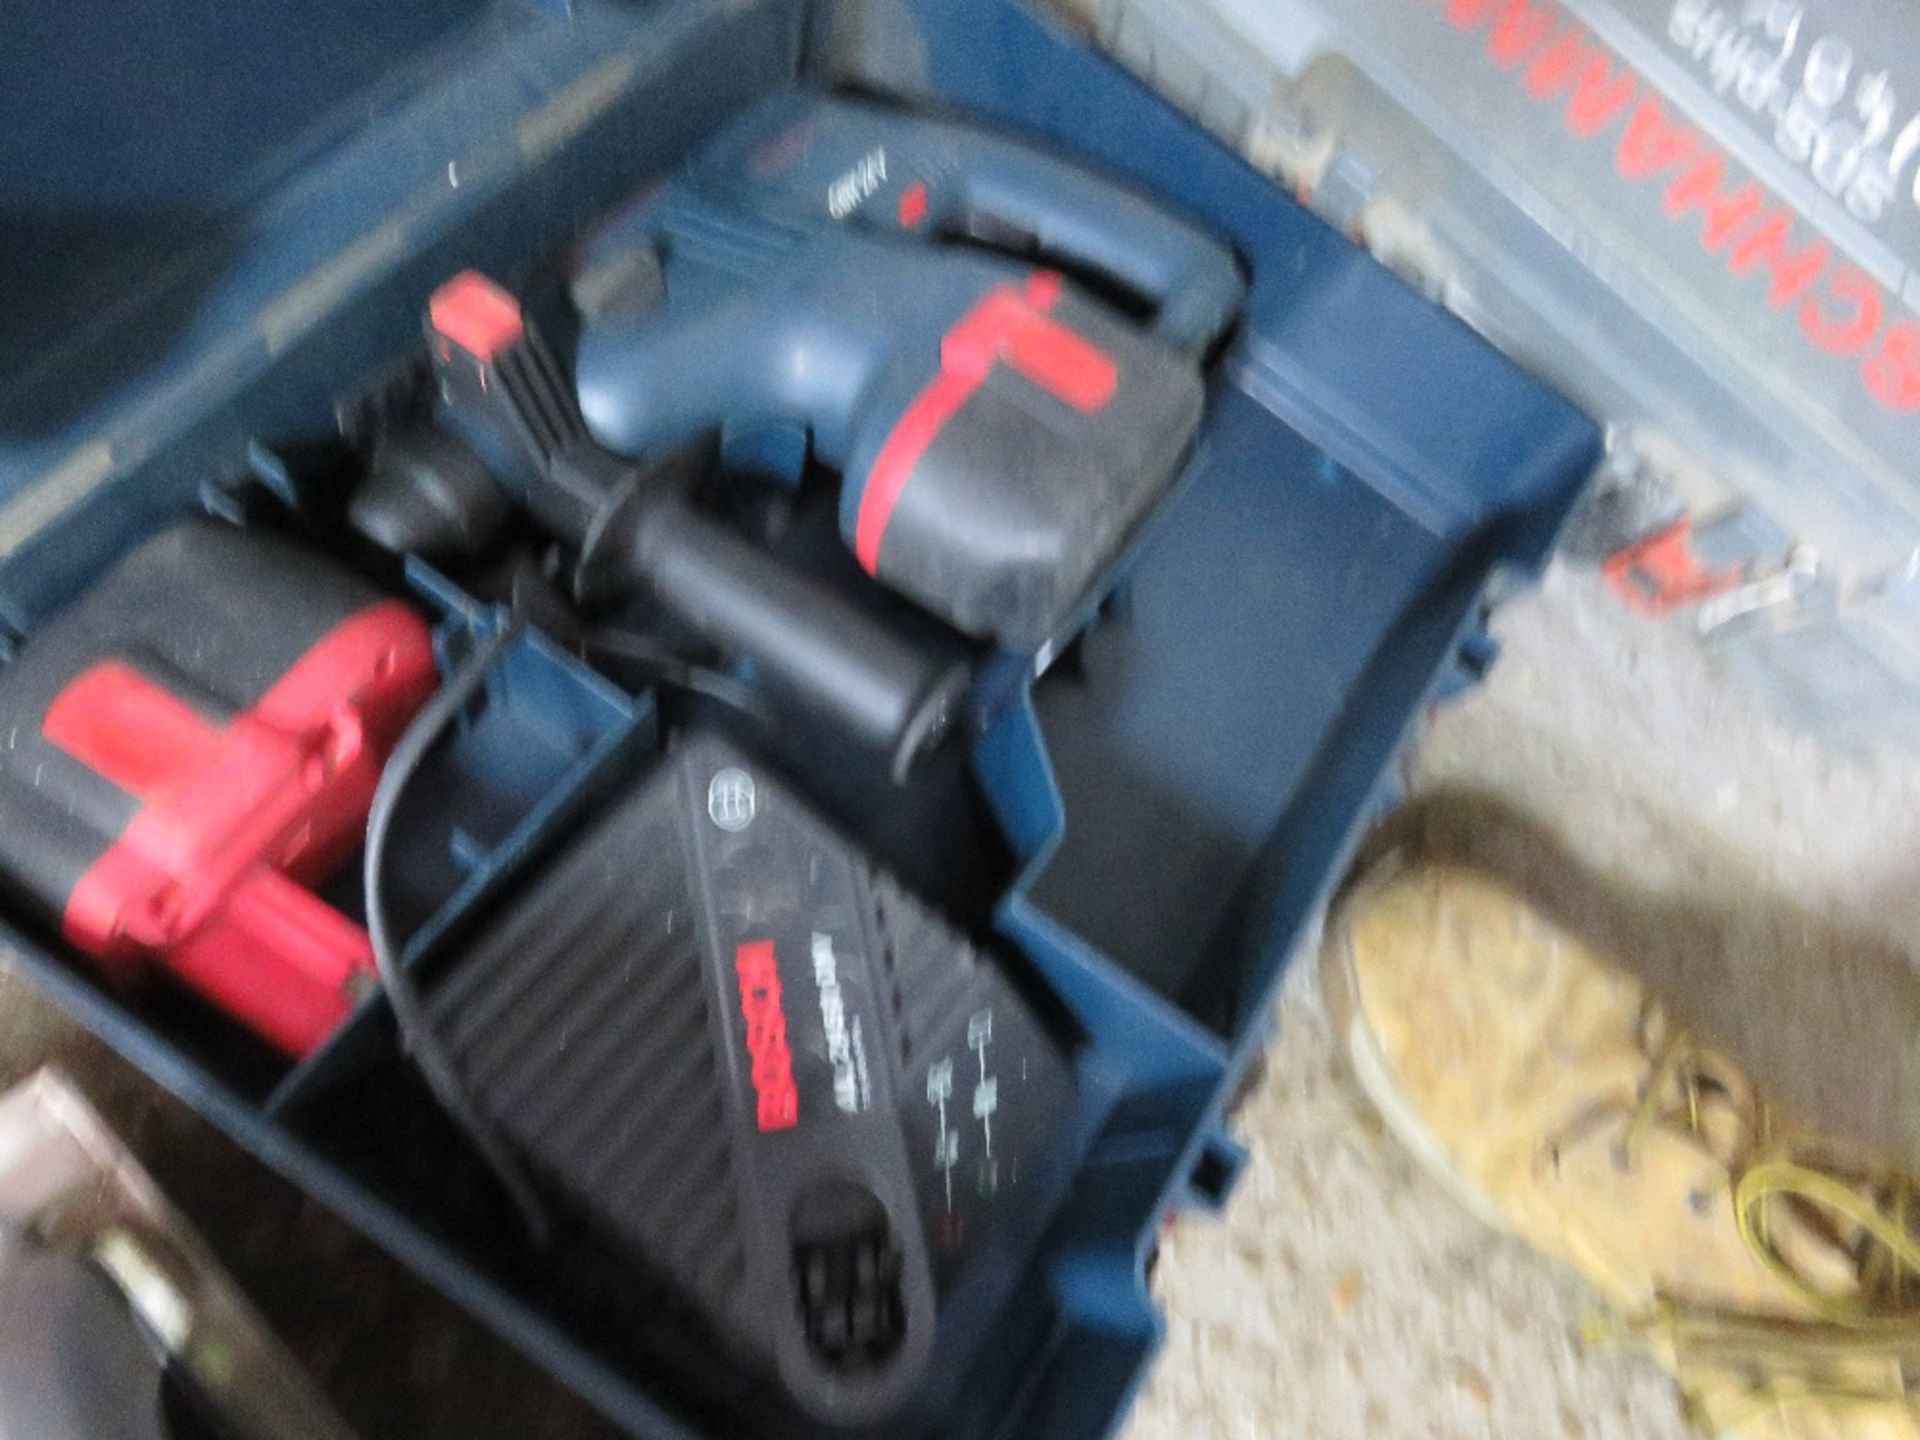 BOSCH GBH 24V BATTERY DRILL SOURCED FROM DEPOT CLEARANCE. - Image 2 of 2